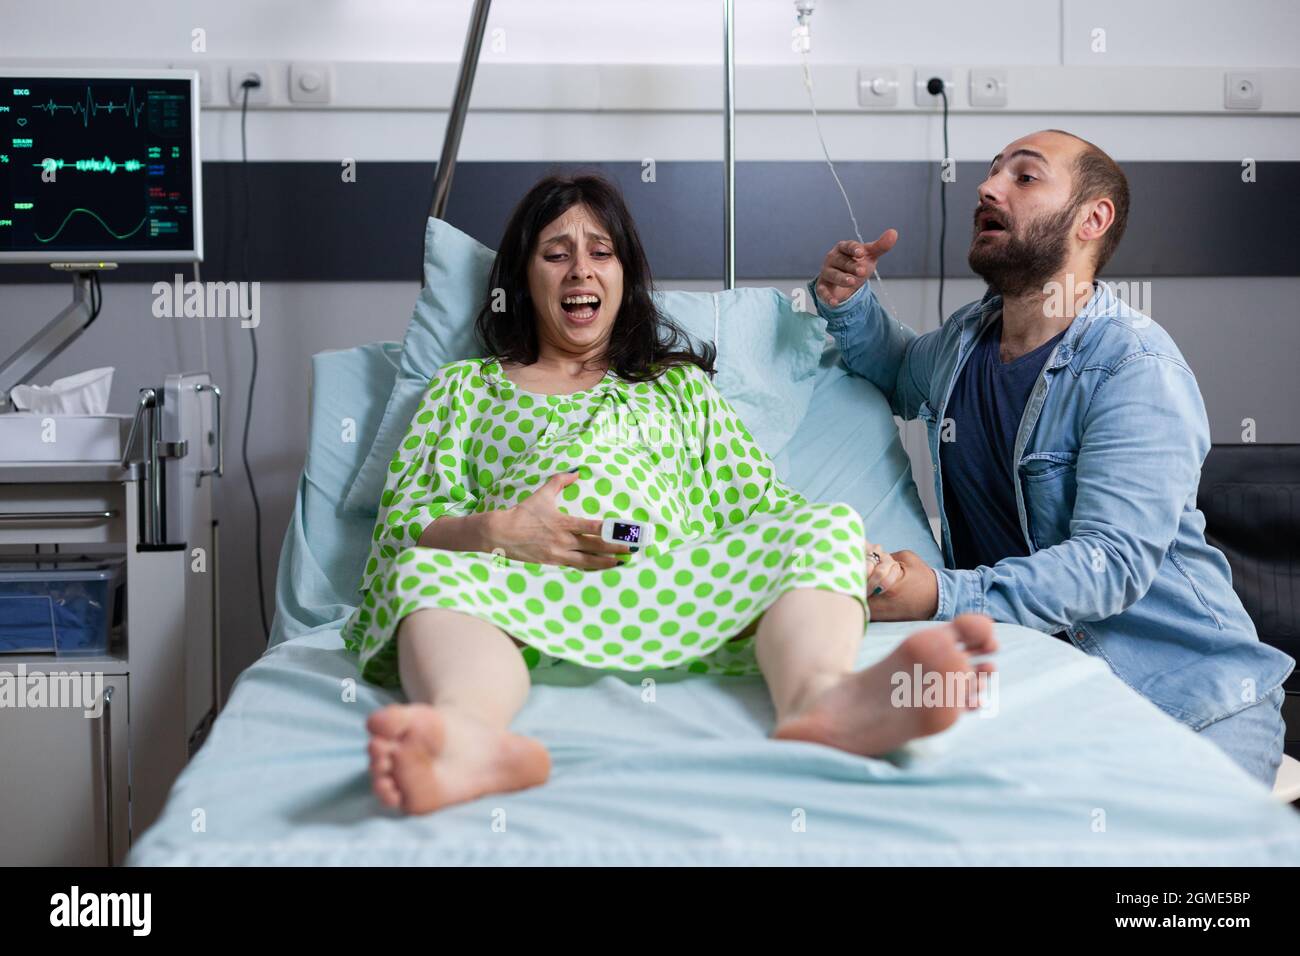 Caucasian couple expecting baby in hospital ward bed at medical facility. Pregnant woman with painful contractions getting into labor while young man panicking about childbirth. Stock Photo